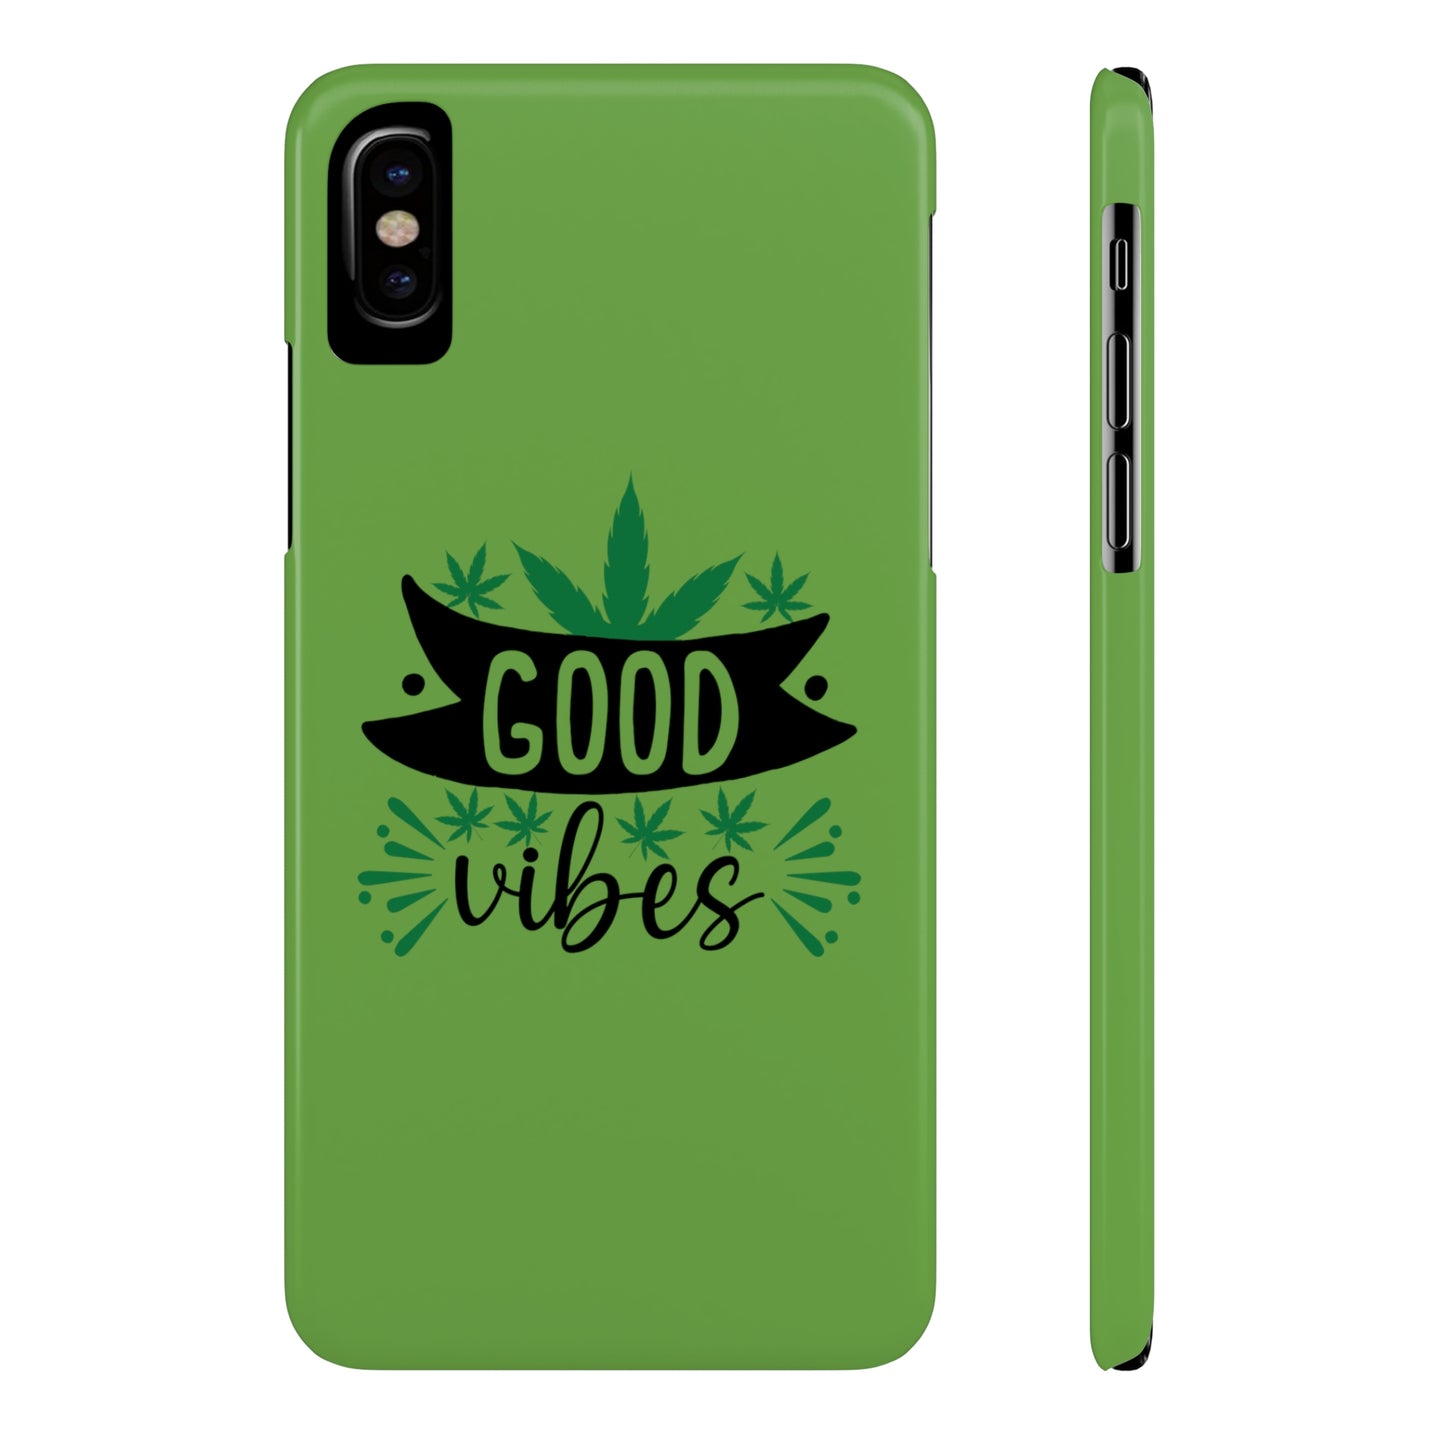 "Good Vibes" iPhone Case - Weave Got Gifts - Unique Gifts You Won’t Find Anywhere Else!